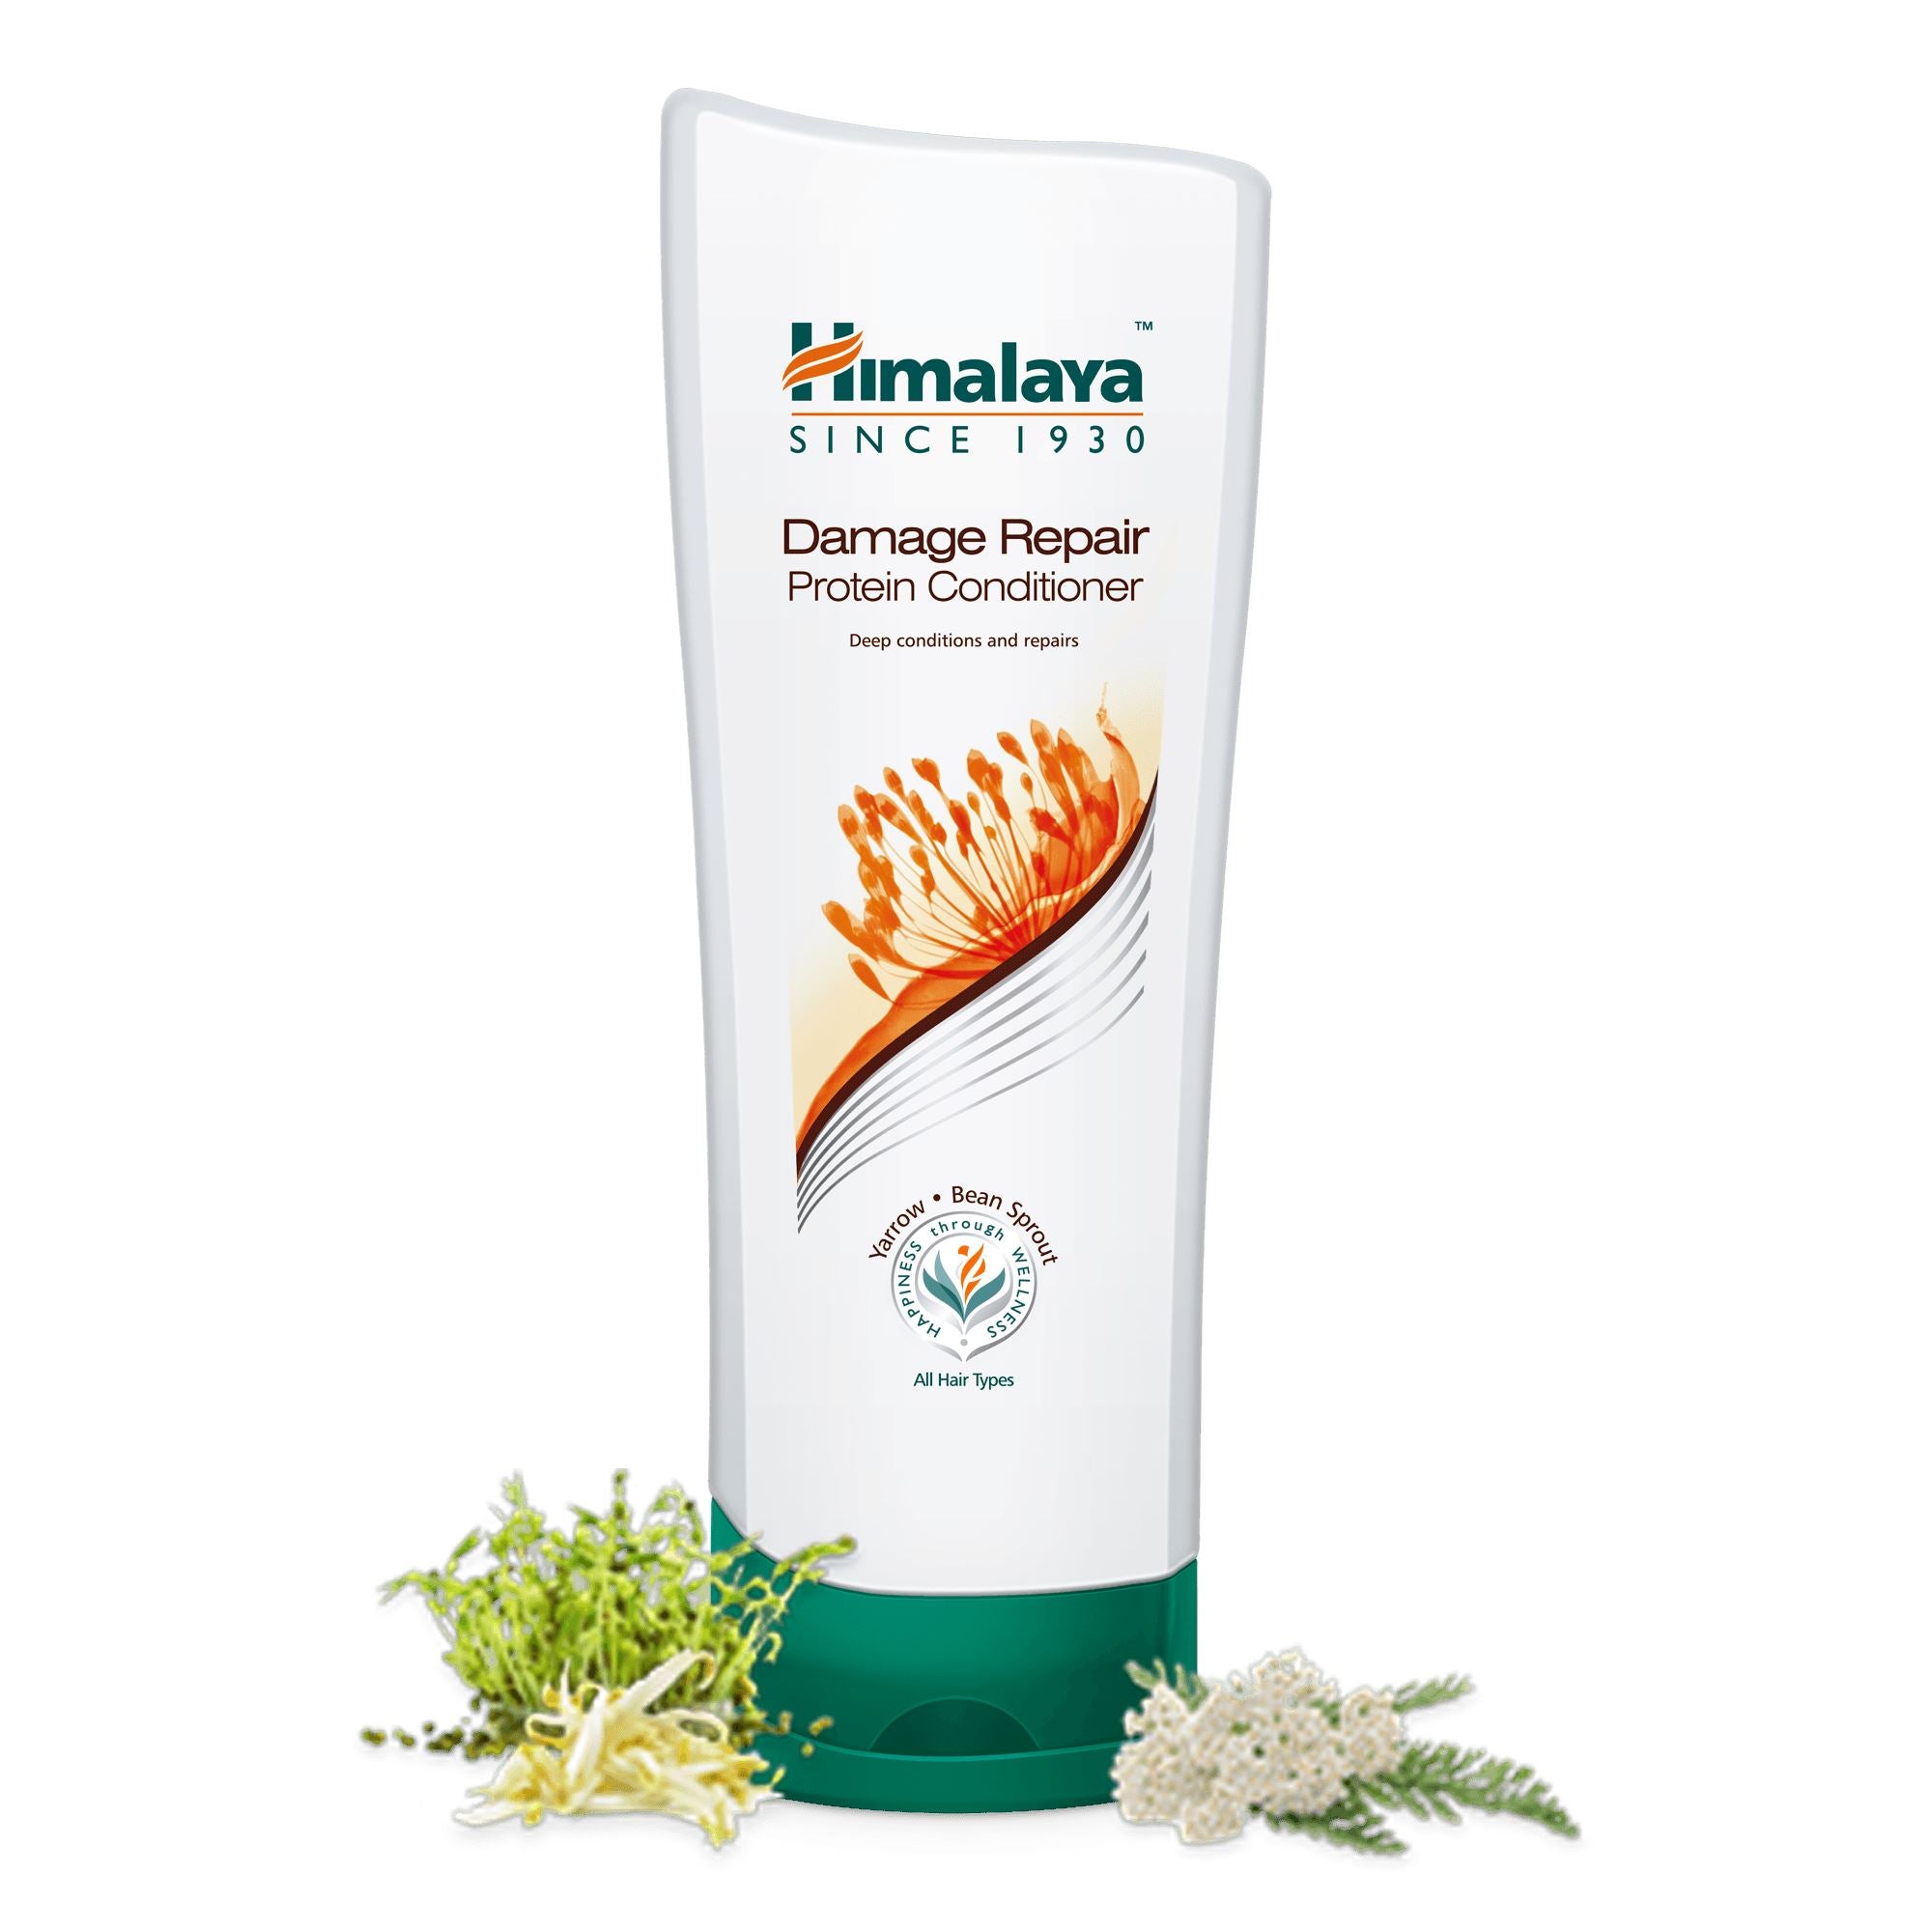 Himalaya Damage Repair Protein Conditioner - Provides conditioning for dry, frizzy or damaged hair